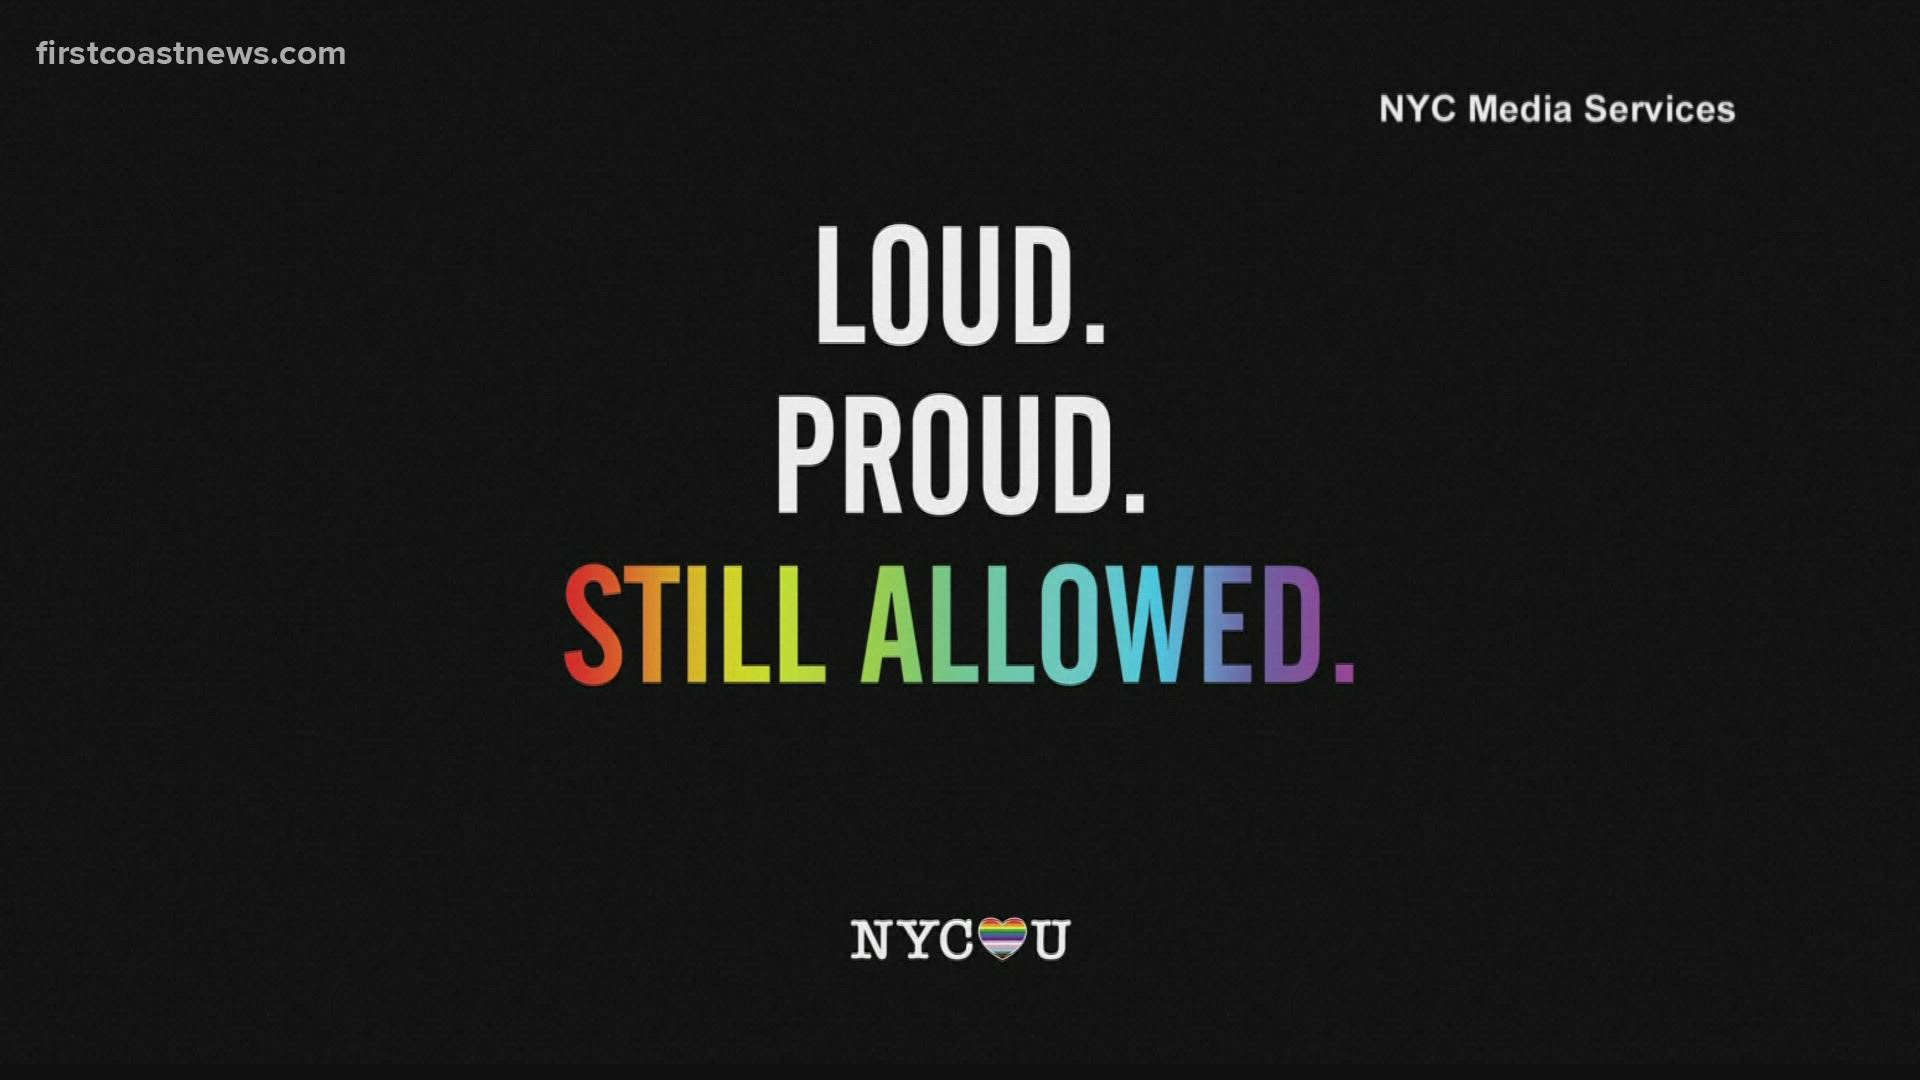 A series of digital billboards will be paid for by New York City Mayor Eric Adams, with messages like "Come to the city where you can say whatever you want."